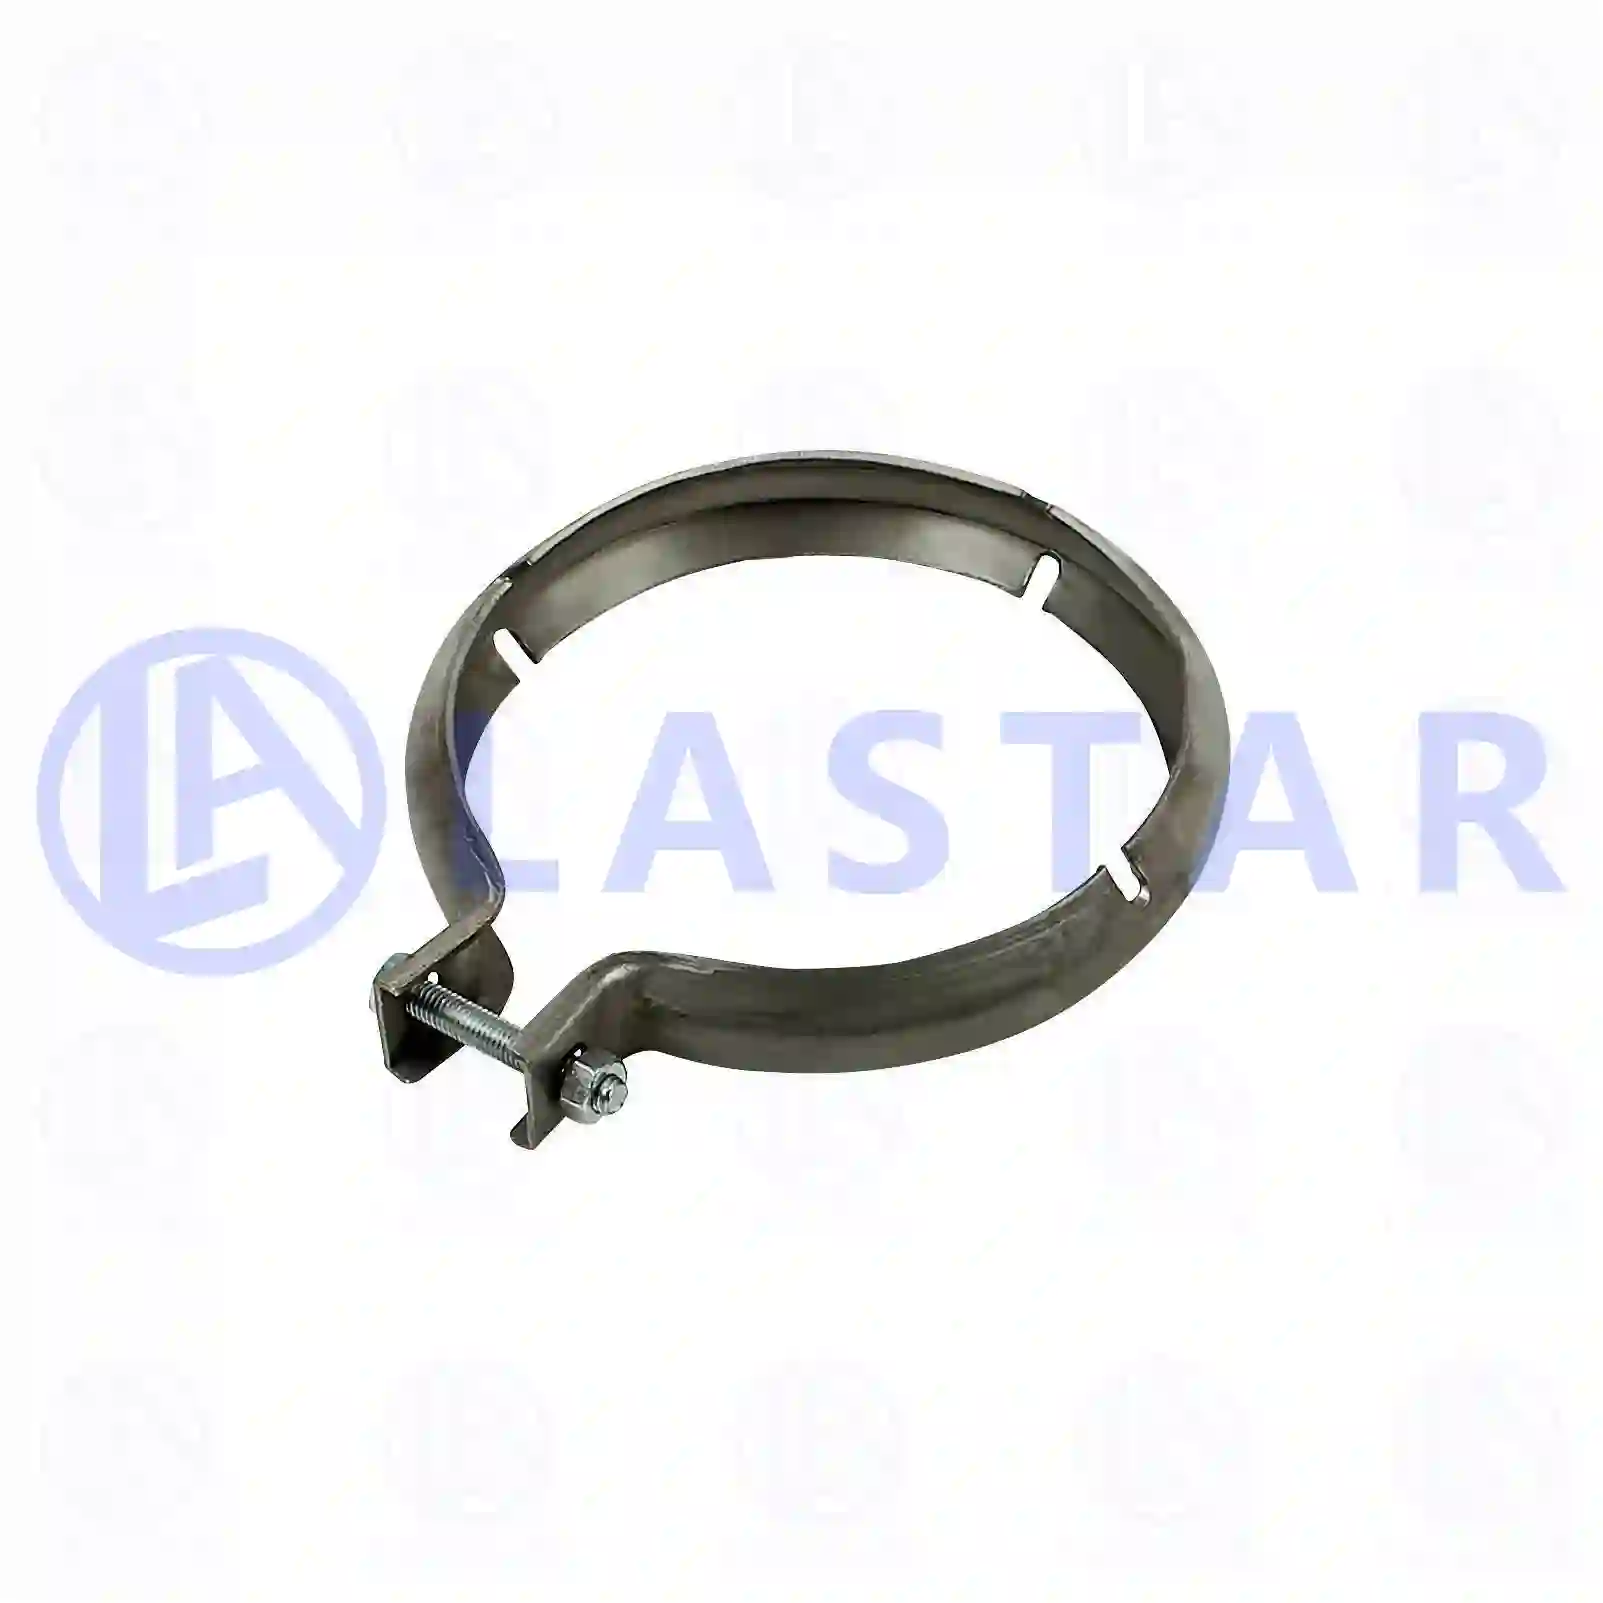 Clamp, 77706306, 4009970090, 9429950033, 9429970090 ||  77706306 Lastar Spare Part | Truck Spare Parts, Auotomotive Spare Parts Clamp, 77706306, 4009970090, 9429950033, 9429970090 ||  77706306 Lastar Spare Part | Truck Spare Parts, Auotomotive Spare Parts